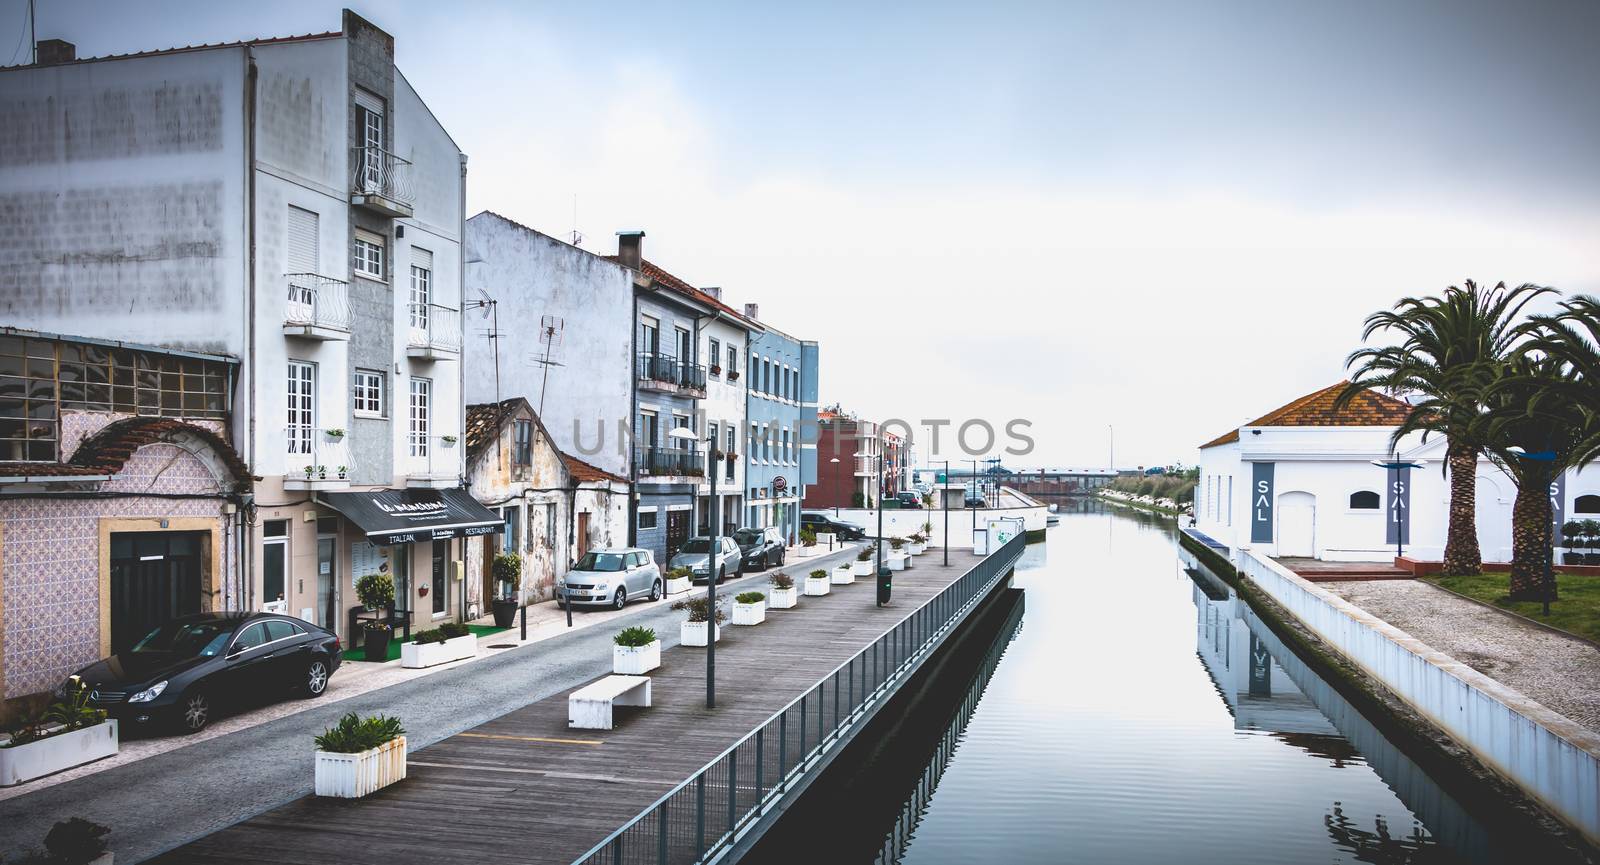 view of the houses surrounding a canal in aveiro, portugal by AtlanticEUROSTOXX